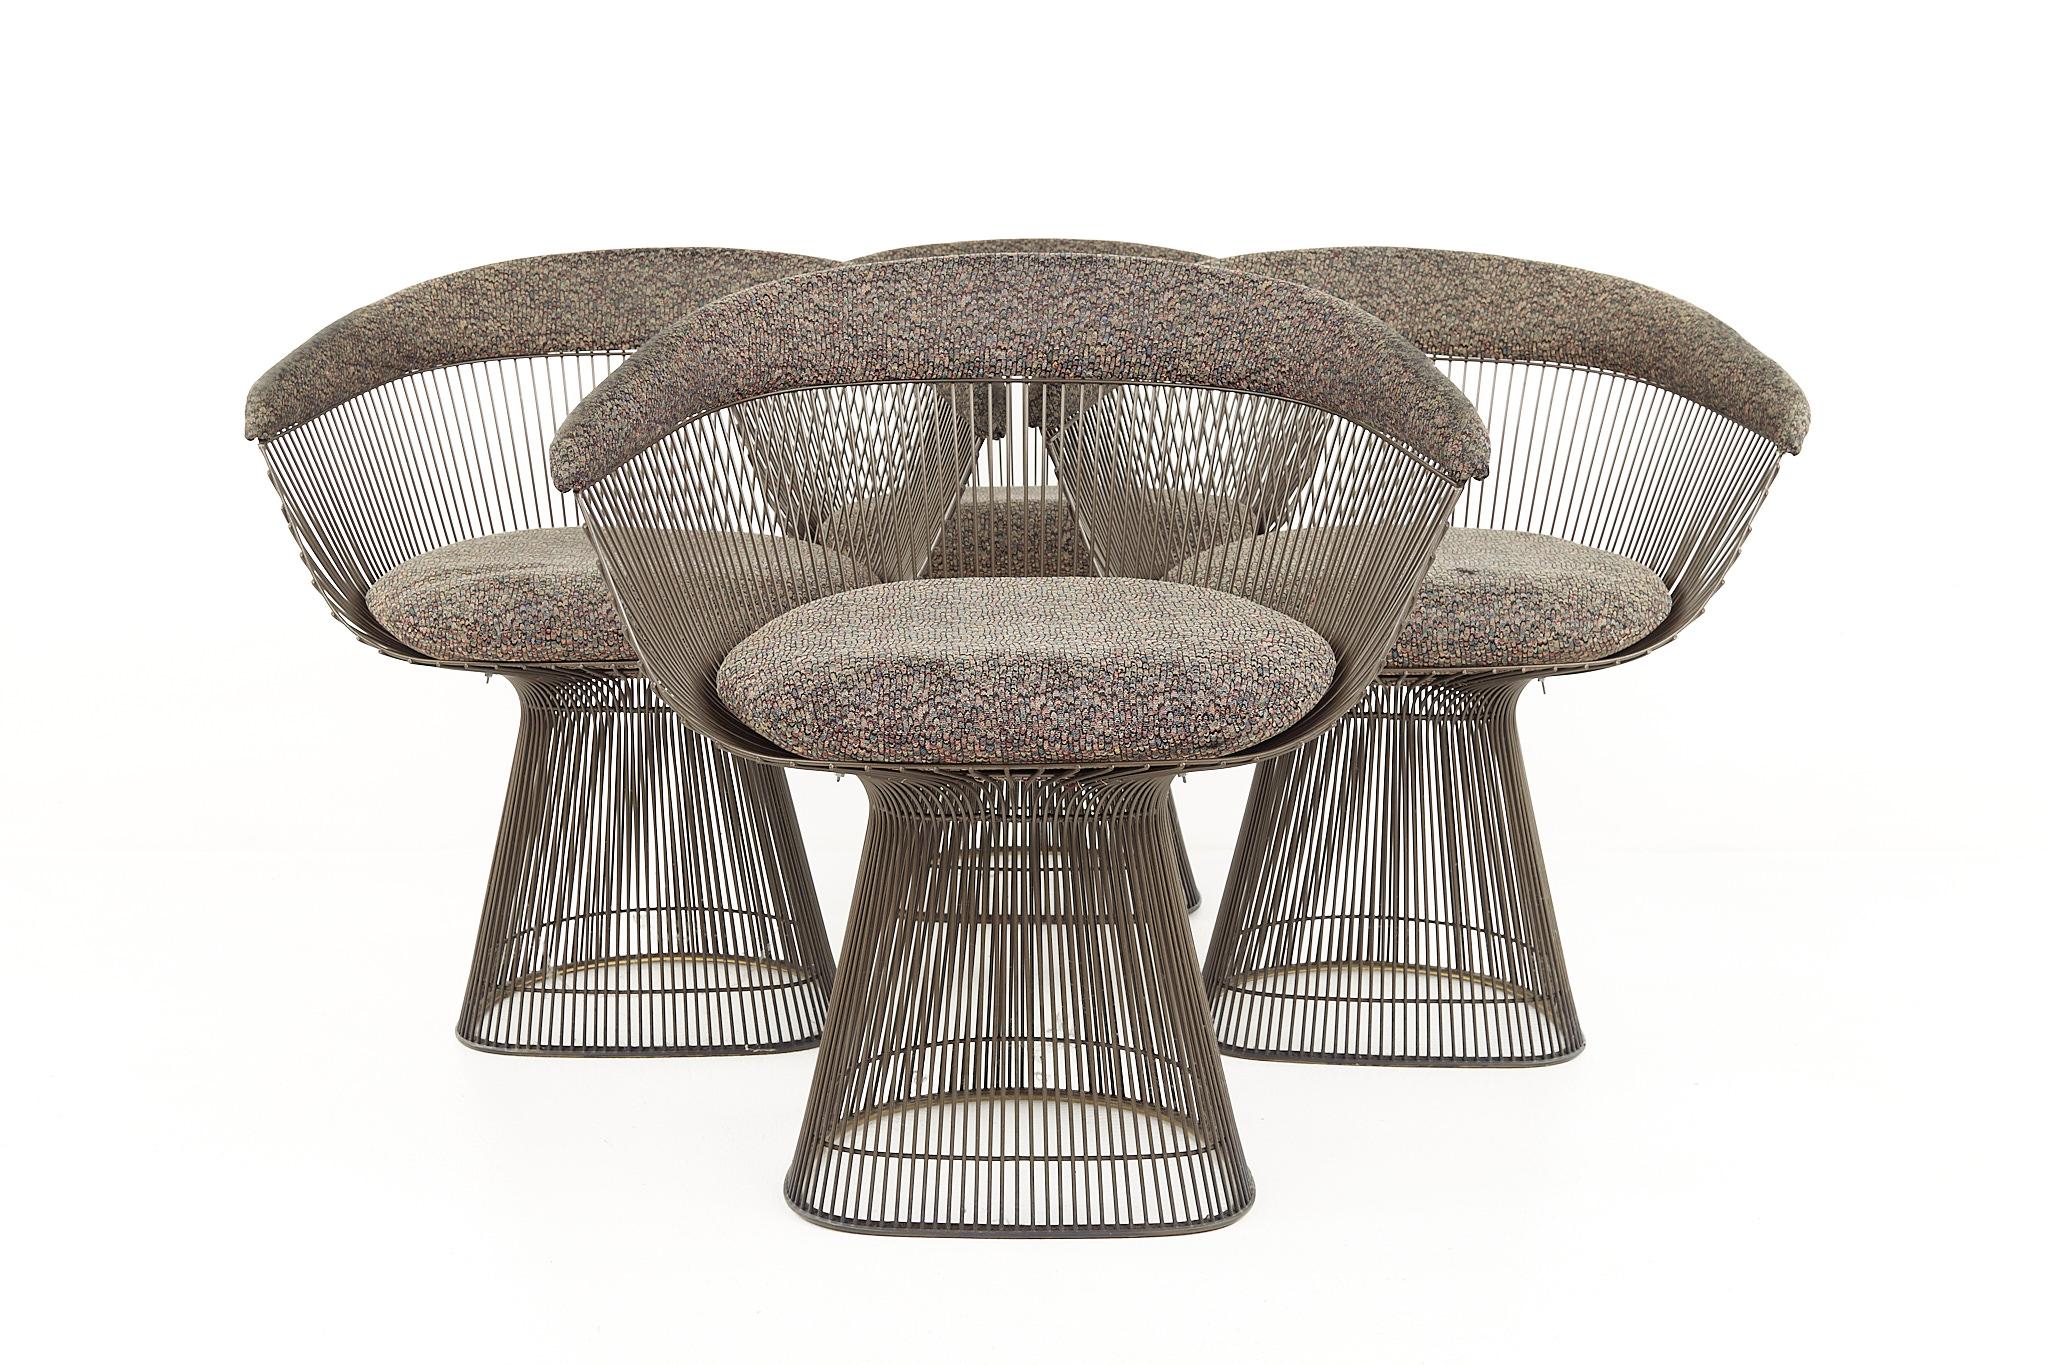 Warren Platner for Knoll mid century dining chairs - Set of 4

Each chair measures: 27.25 wide x 19 deep x 29.25 high, with a seat height of 18.5 inches and an arm height/chair clearance of 26 inches

All pieces of furniture can be had in what